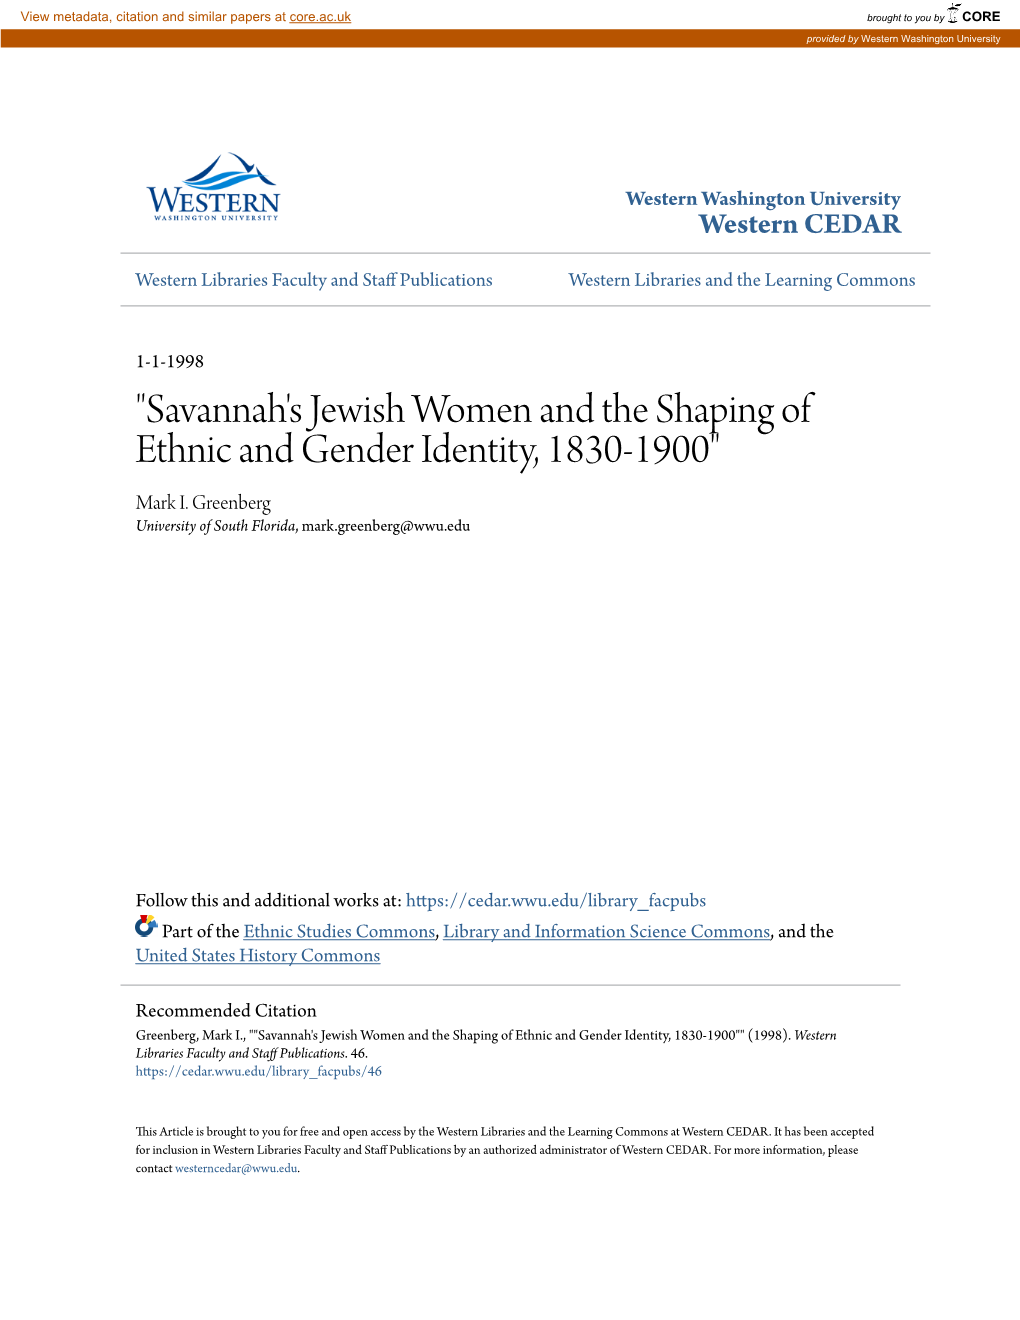 Savannah's Jewish Women and the Shaping of Ethnic and Gender Identity, 1830-1900" Mark I